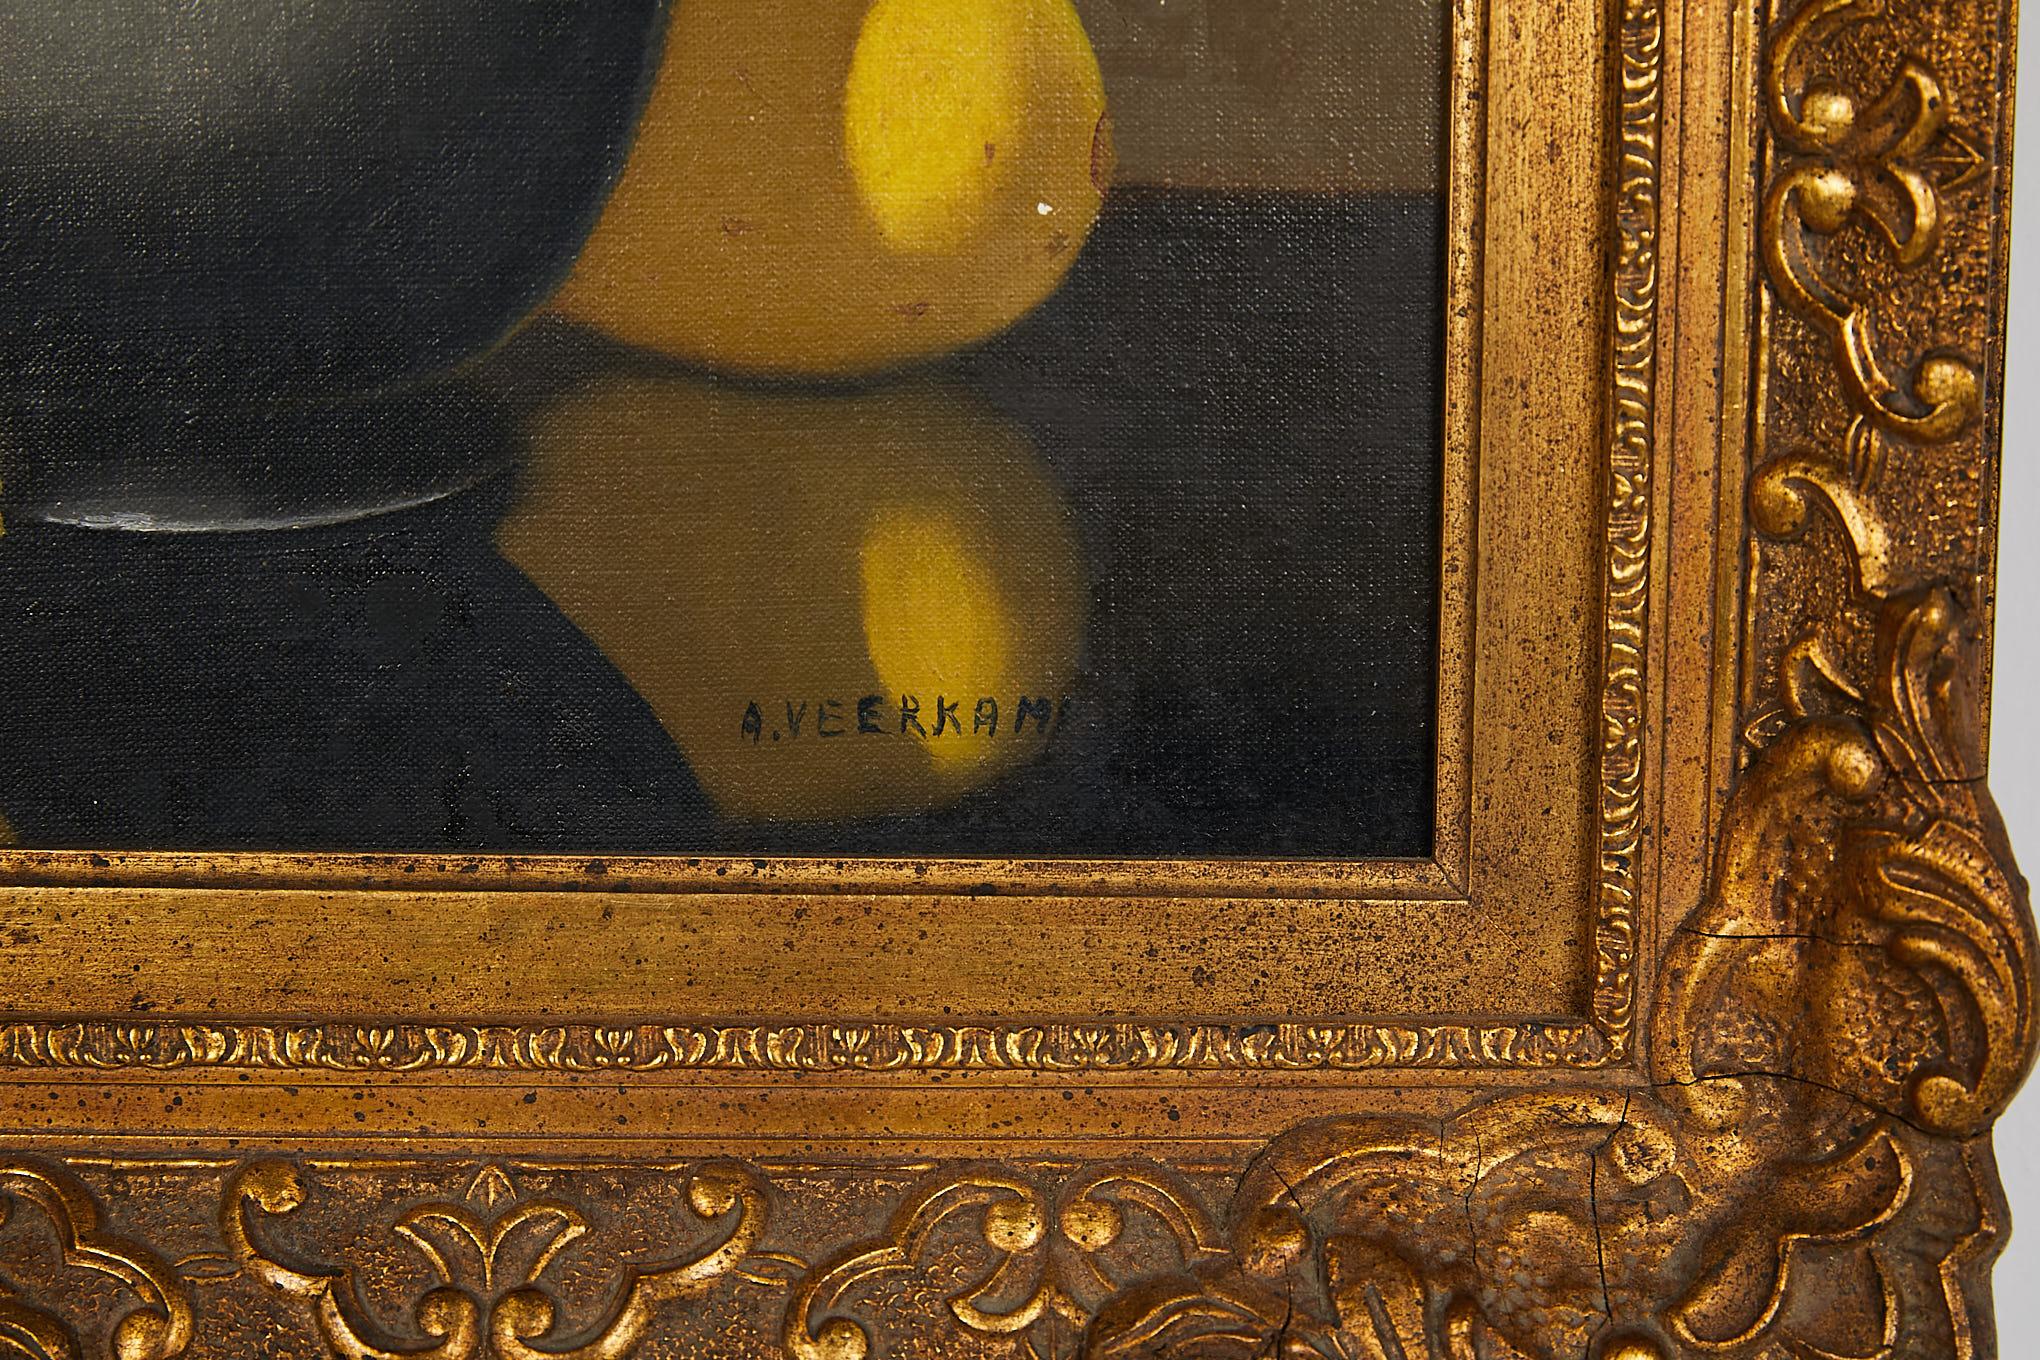 Pair of beautiful quality 19th century Dutch oil paintings in matching carved giltwood frames and bearing the nameplate of the artist, A. Veerkamp. Both paintings feature an ecru background and a glossy black table surface in the foreground. On top